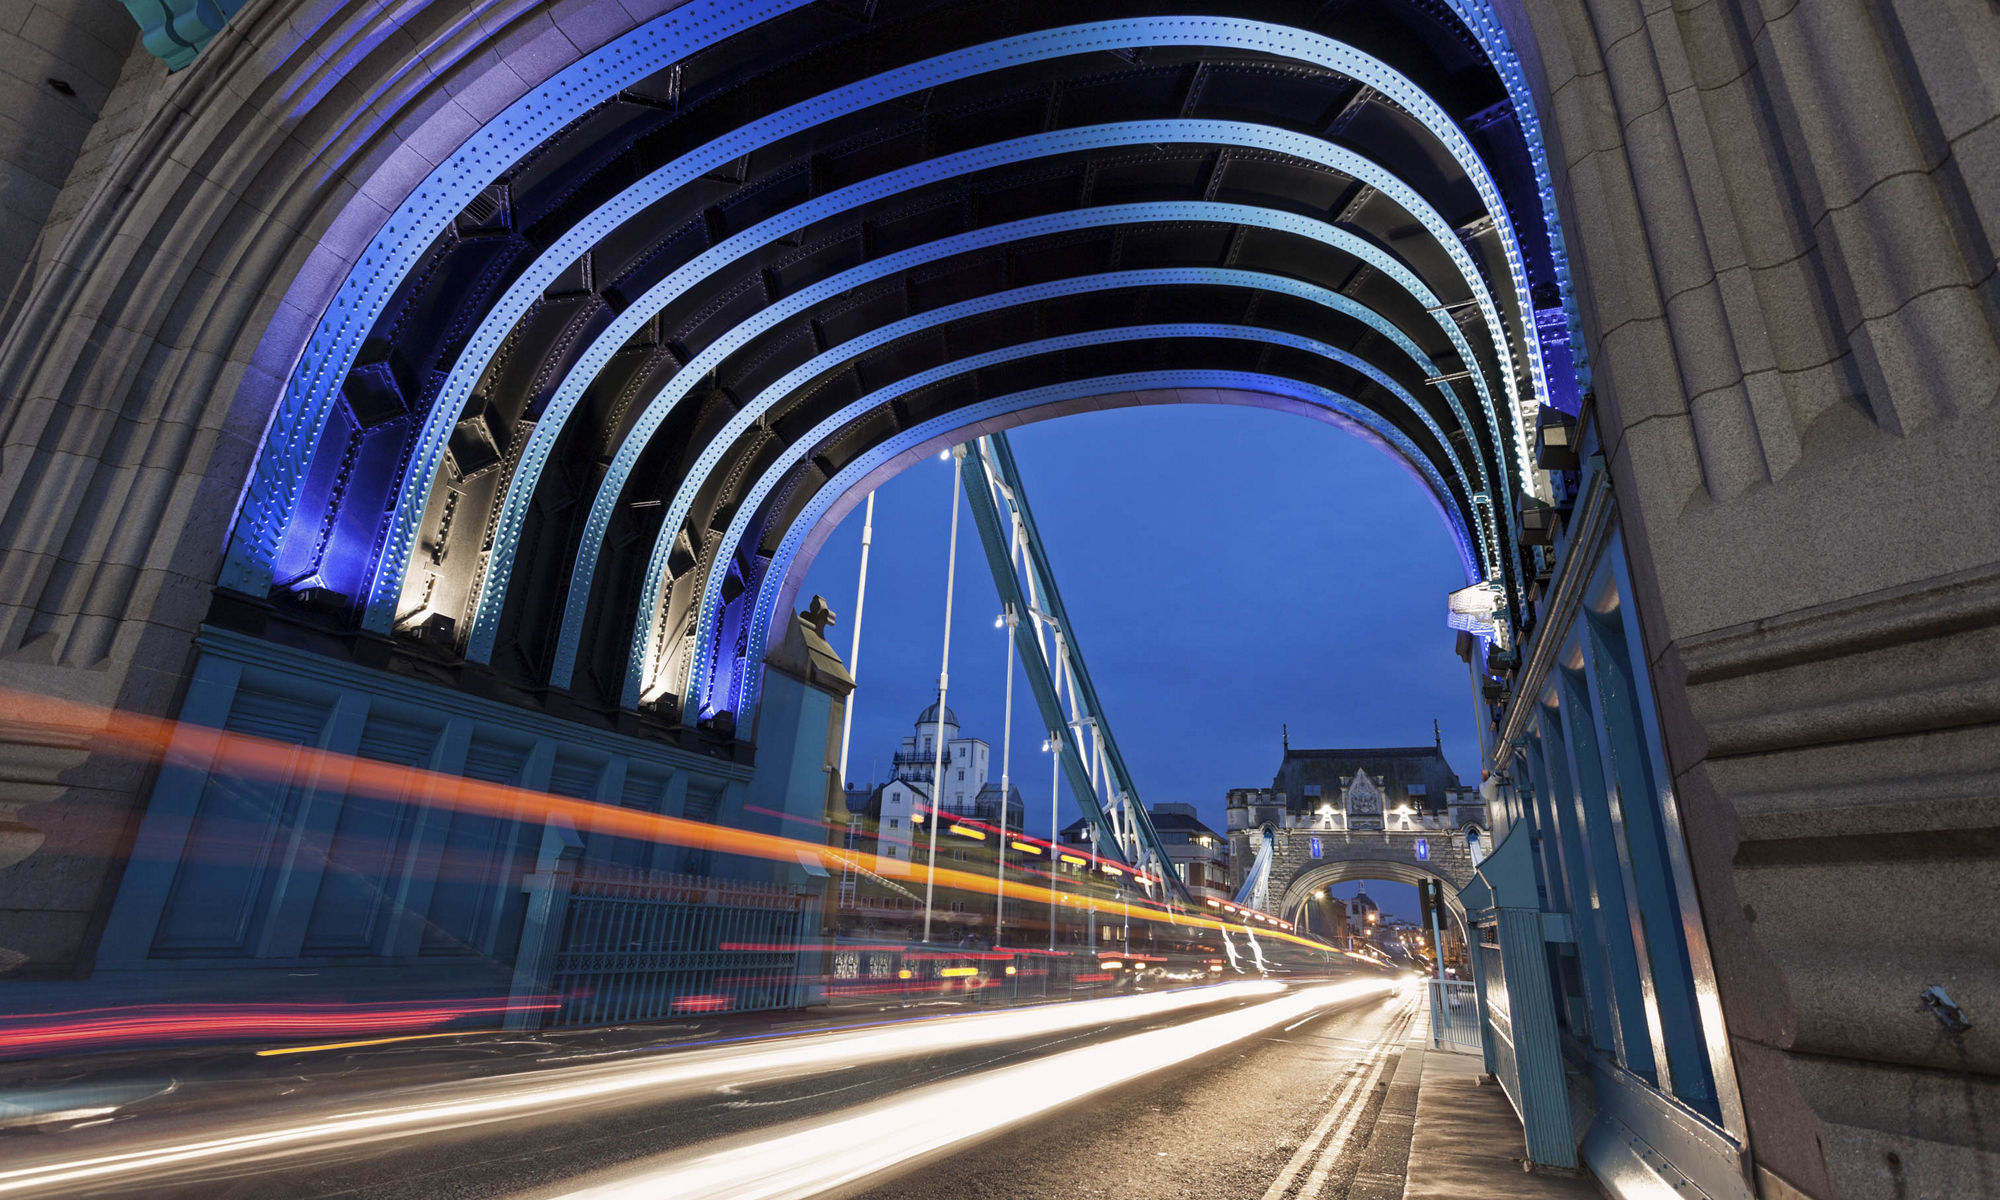 View coming out of a tunnel of blue lit night sky with bridge and city lights in the background